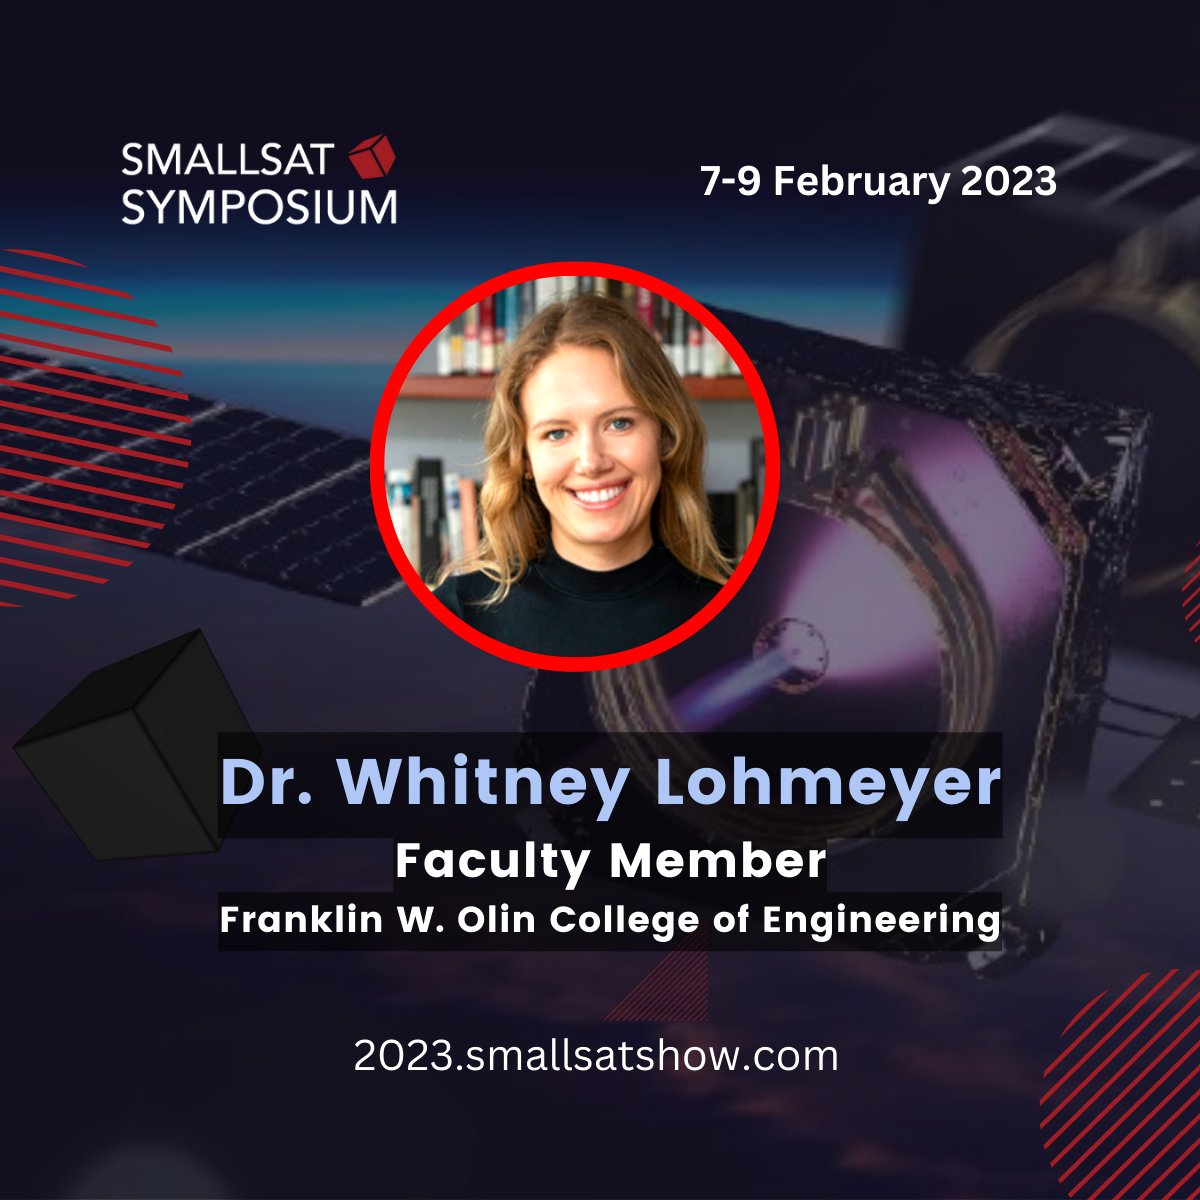 Dr. Whitney Q. Lohmeyer is a leading satellite communications industry advisor. She serves on the faculty at Olin College of Engineering and is a Research Affiliate at MIT in #Aeronautics and #Astronautics: bit.ly/3WKMsJf #smallsat #smallsatshow #smallsatsymposium